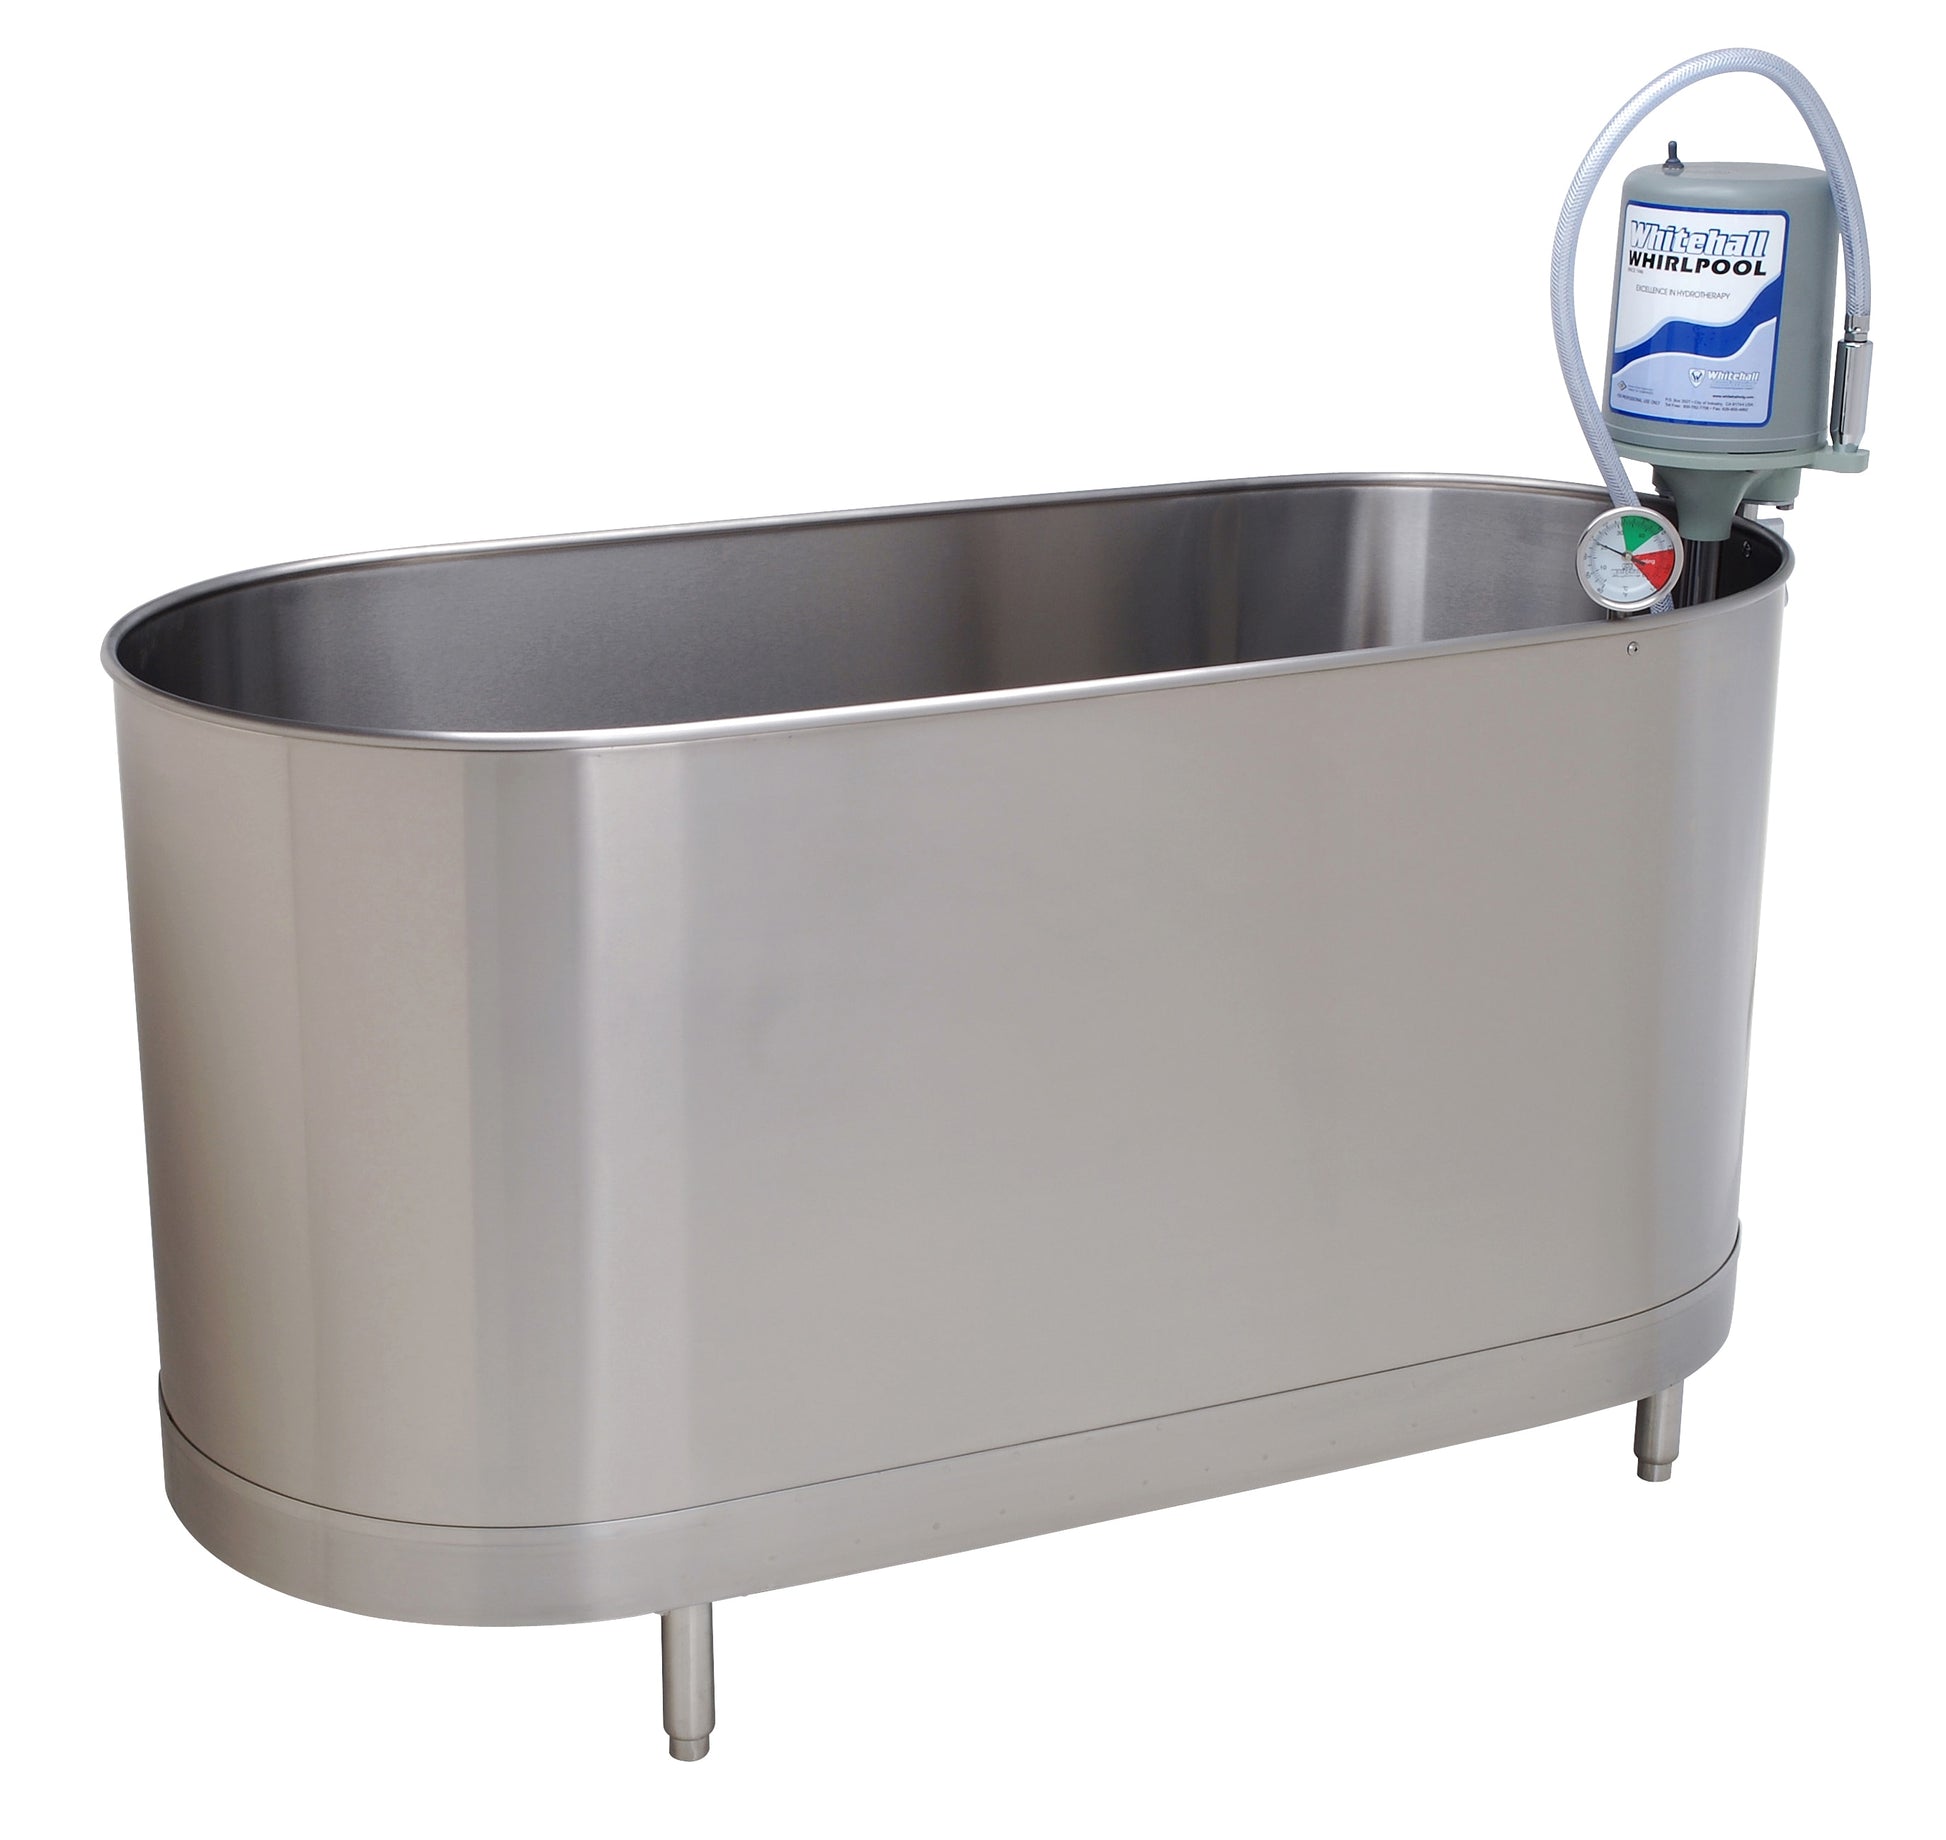 Whitehall S-85-SL 85 Gallons Stationary Whirlpool with Legs